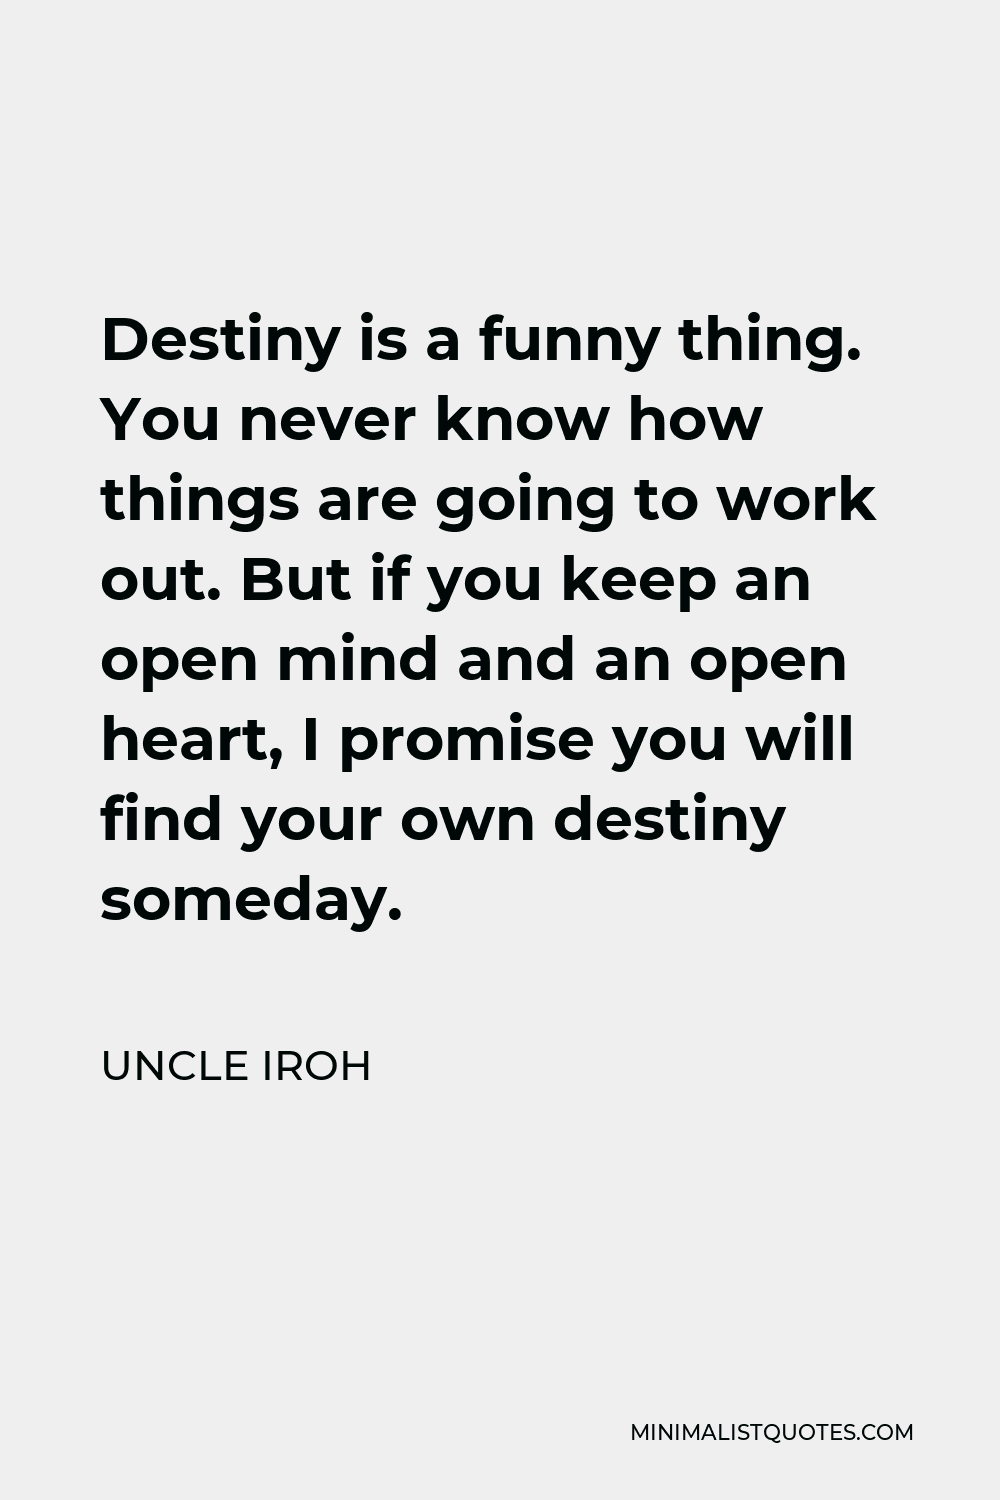 Uncle Iroh Quote - Destiny is a funny thing. You never know how things are going to work out. But if you keep an open mind and an open heart, I promise you will find your own destiny someday.